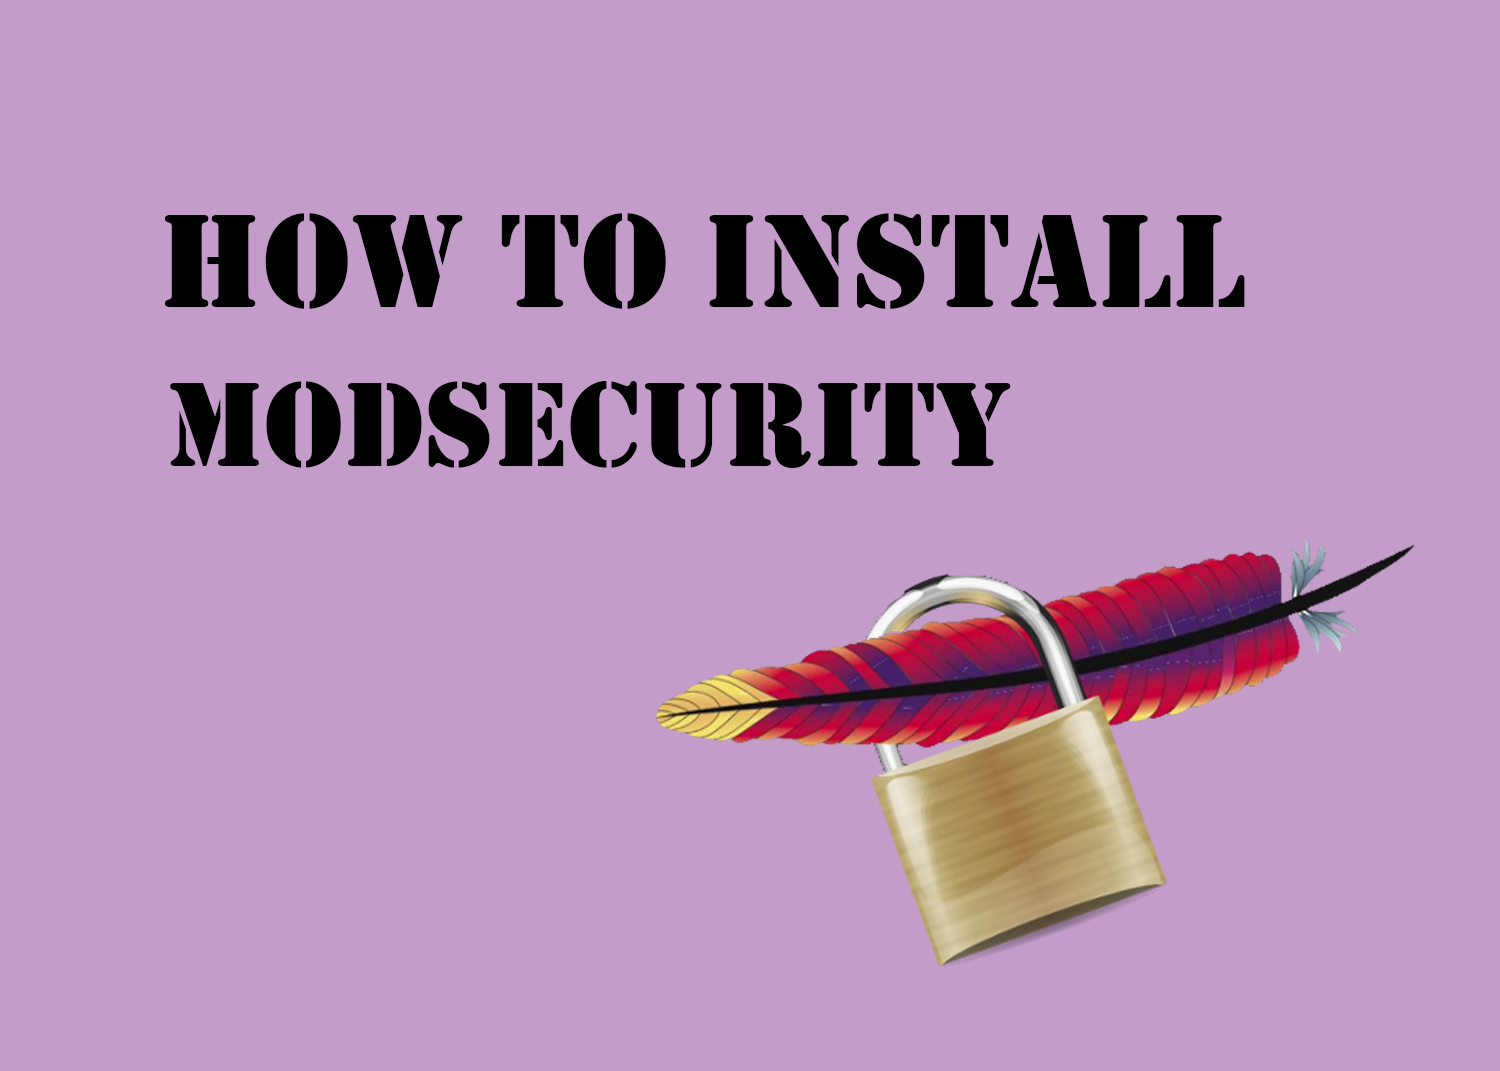 modsecurity.